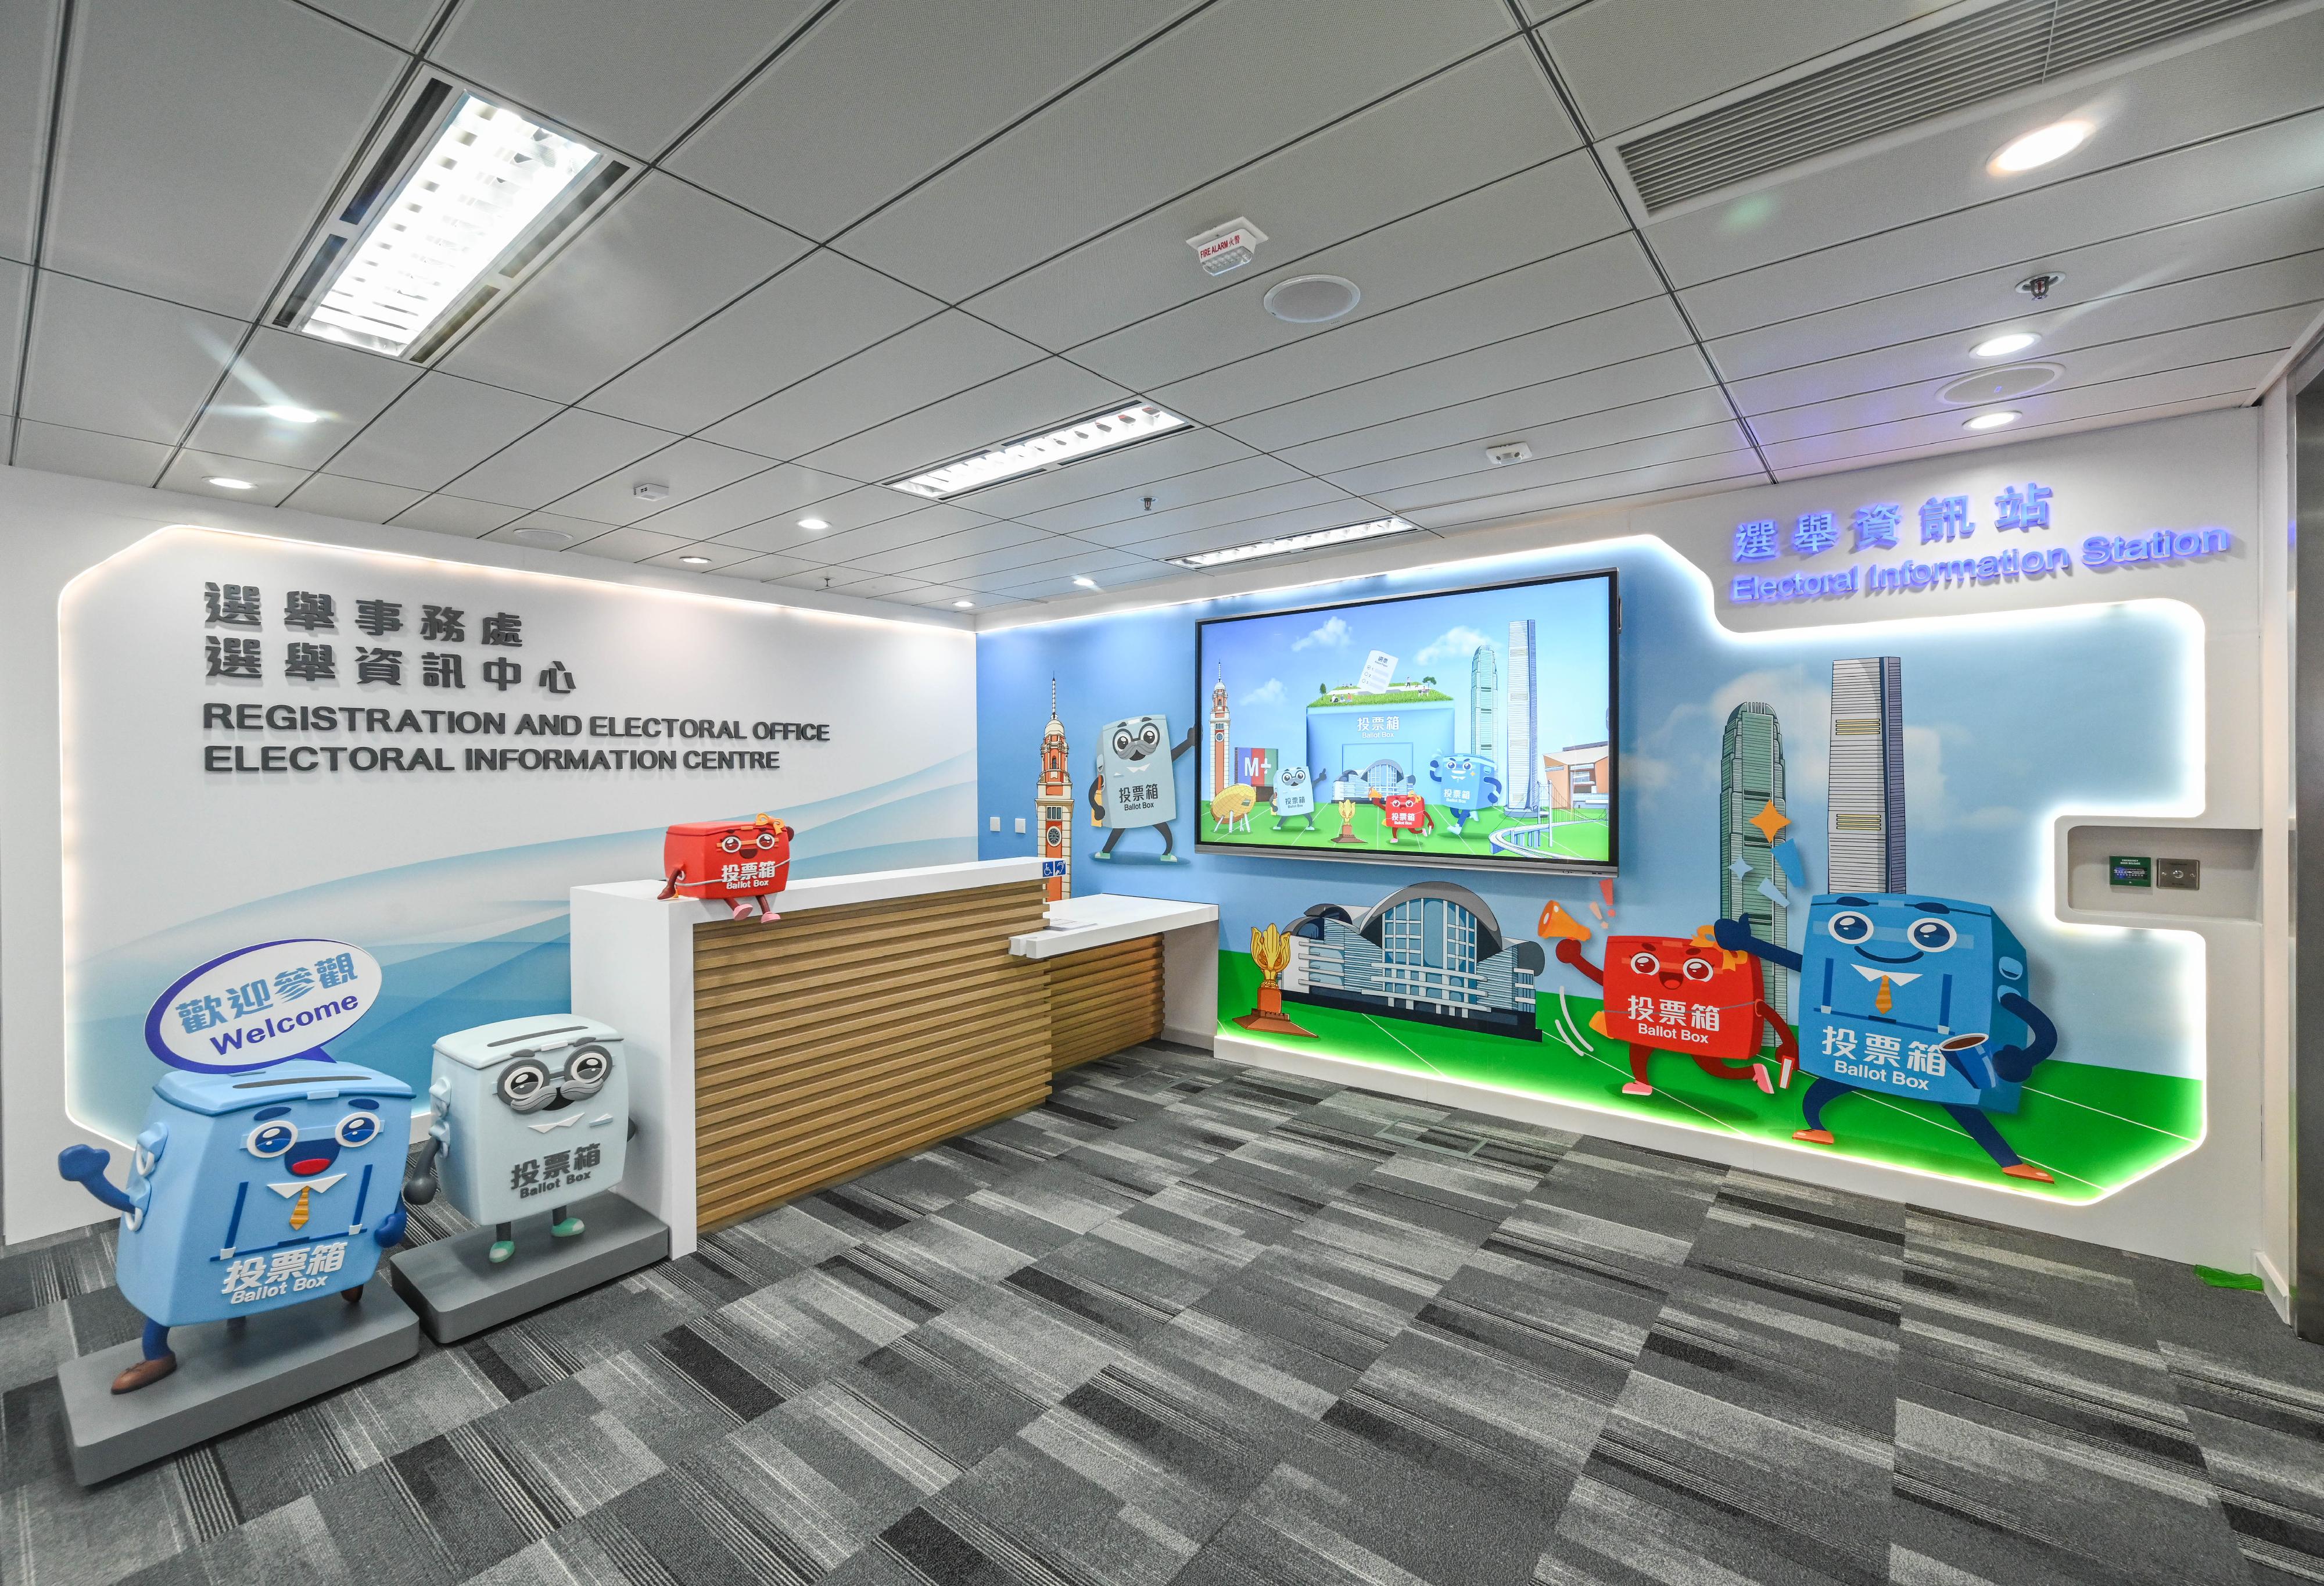 The brand new Electoral Information Centre (EIC) of the Registration and Electoral Office today (October 24) officially came into operation with a new look at the new site located at the Treasury Building, Cheung Sha Wan. Photo shows the Electoral Information Station of the EIC.